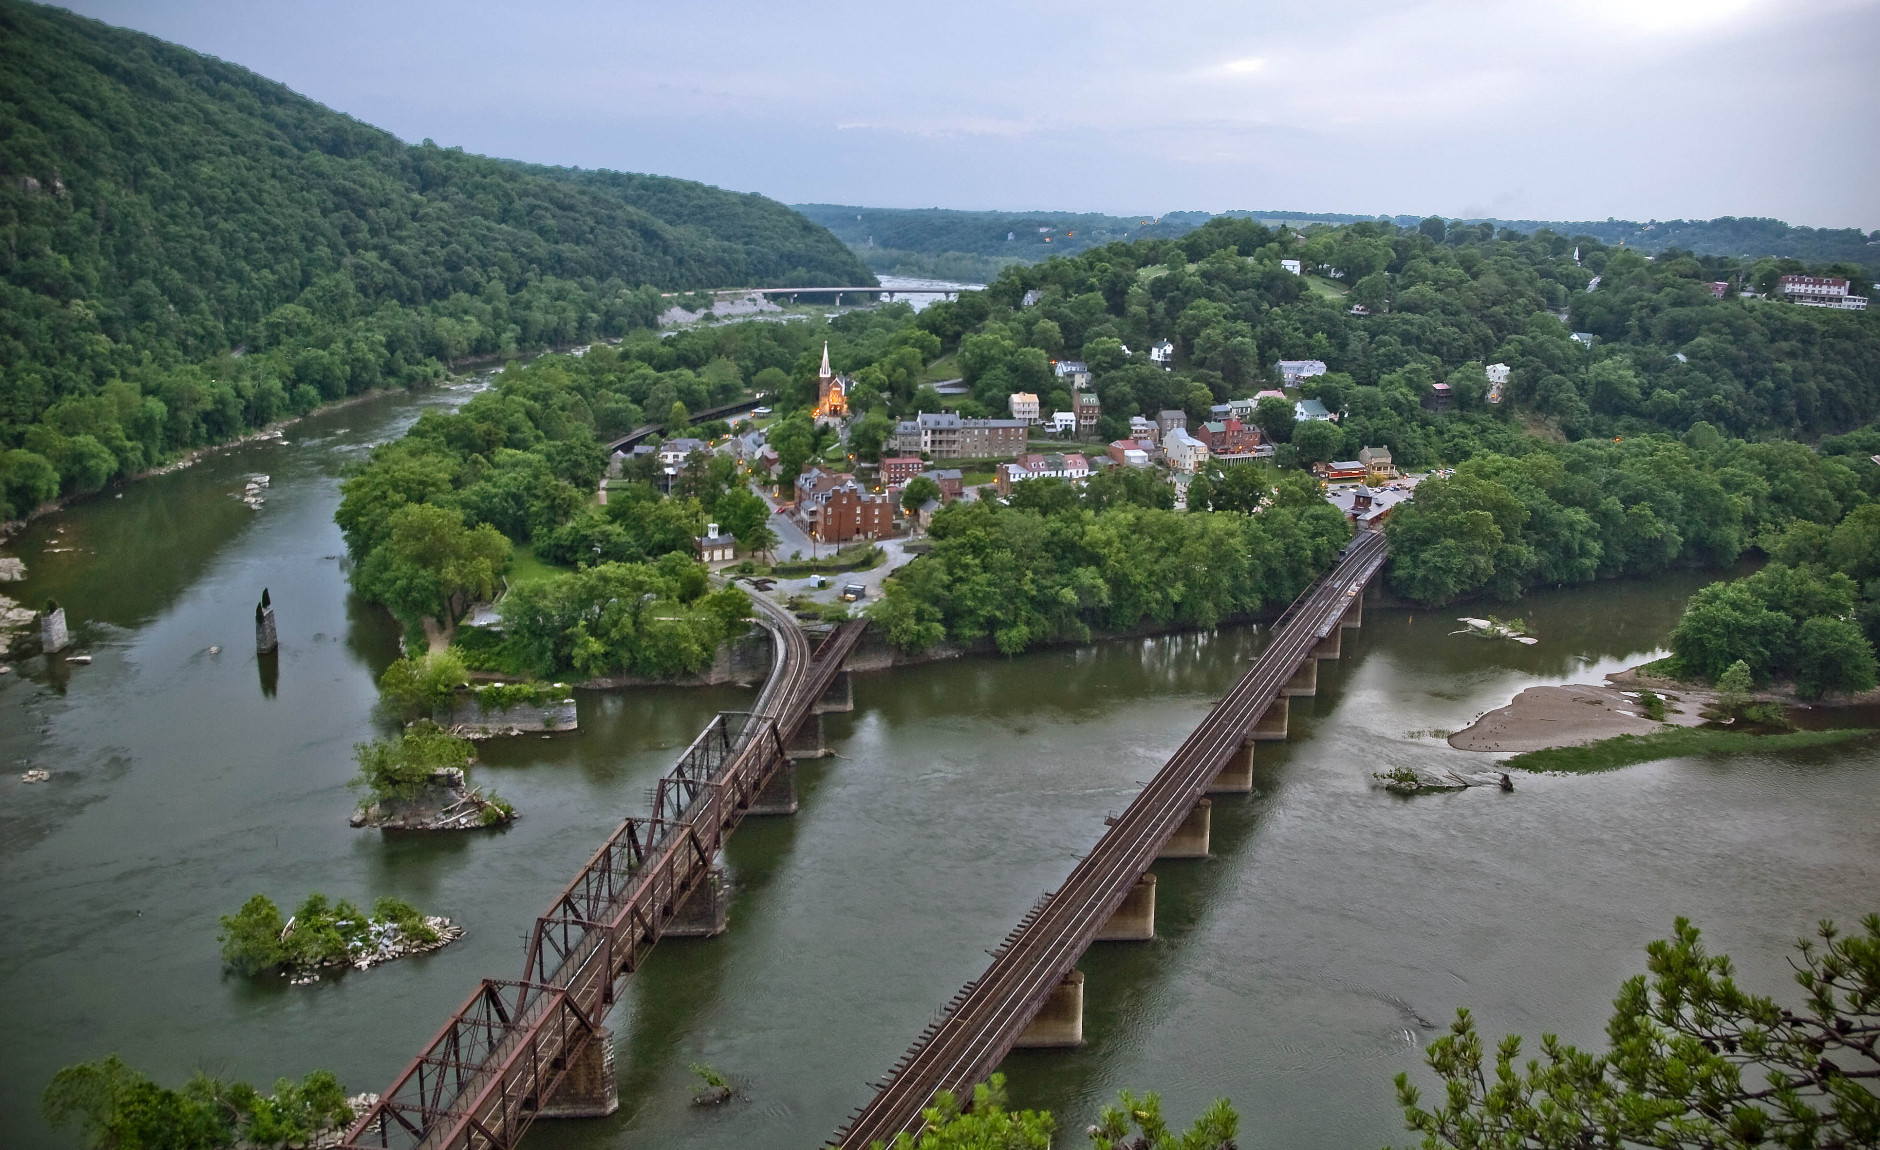 ** ADVANCE FOR WEEKEND EDITIONS, JUNE 13-14 ** FILE - This July 20, 2008 file photo offers a view looking down on Harpers Ferry, W.Va., at the conjunction of the Shanandoah, left, and the Potomac Rivers. The town was the site of abolitionist John Brown's infamous 1859 raid on the local arsenal, an event which led toward the Civil War. (AP/ Martin B. Cherry)